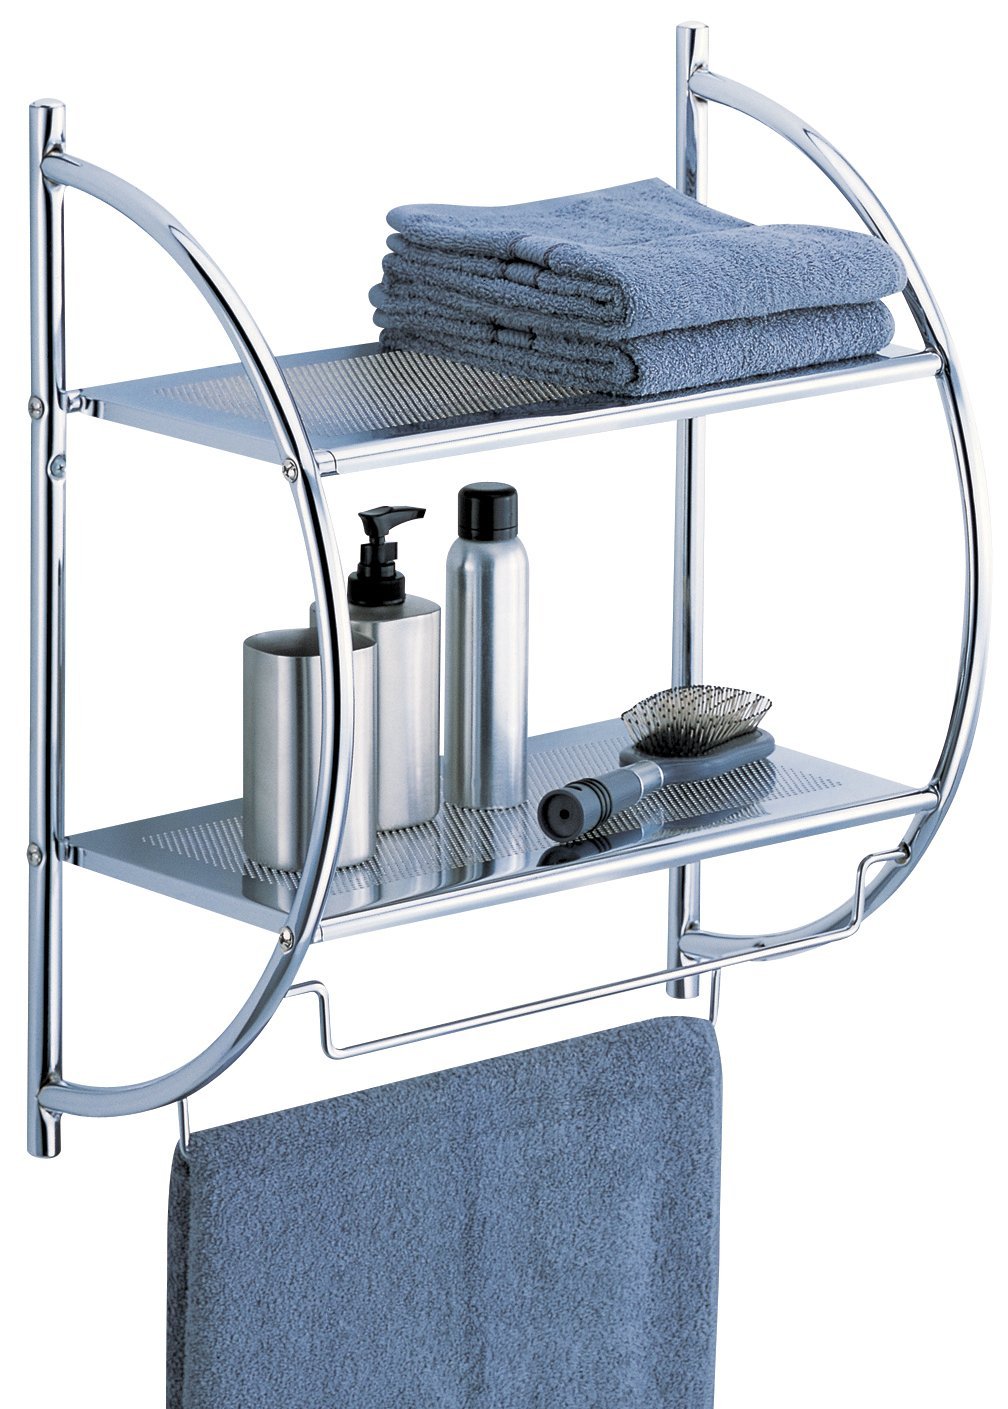 Organize It All 2 tier shelf with towel bars for $12